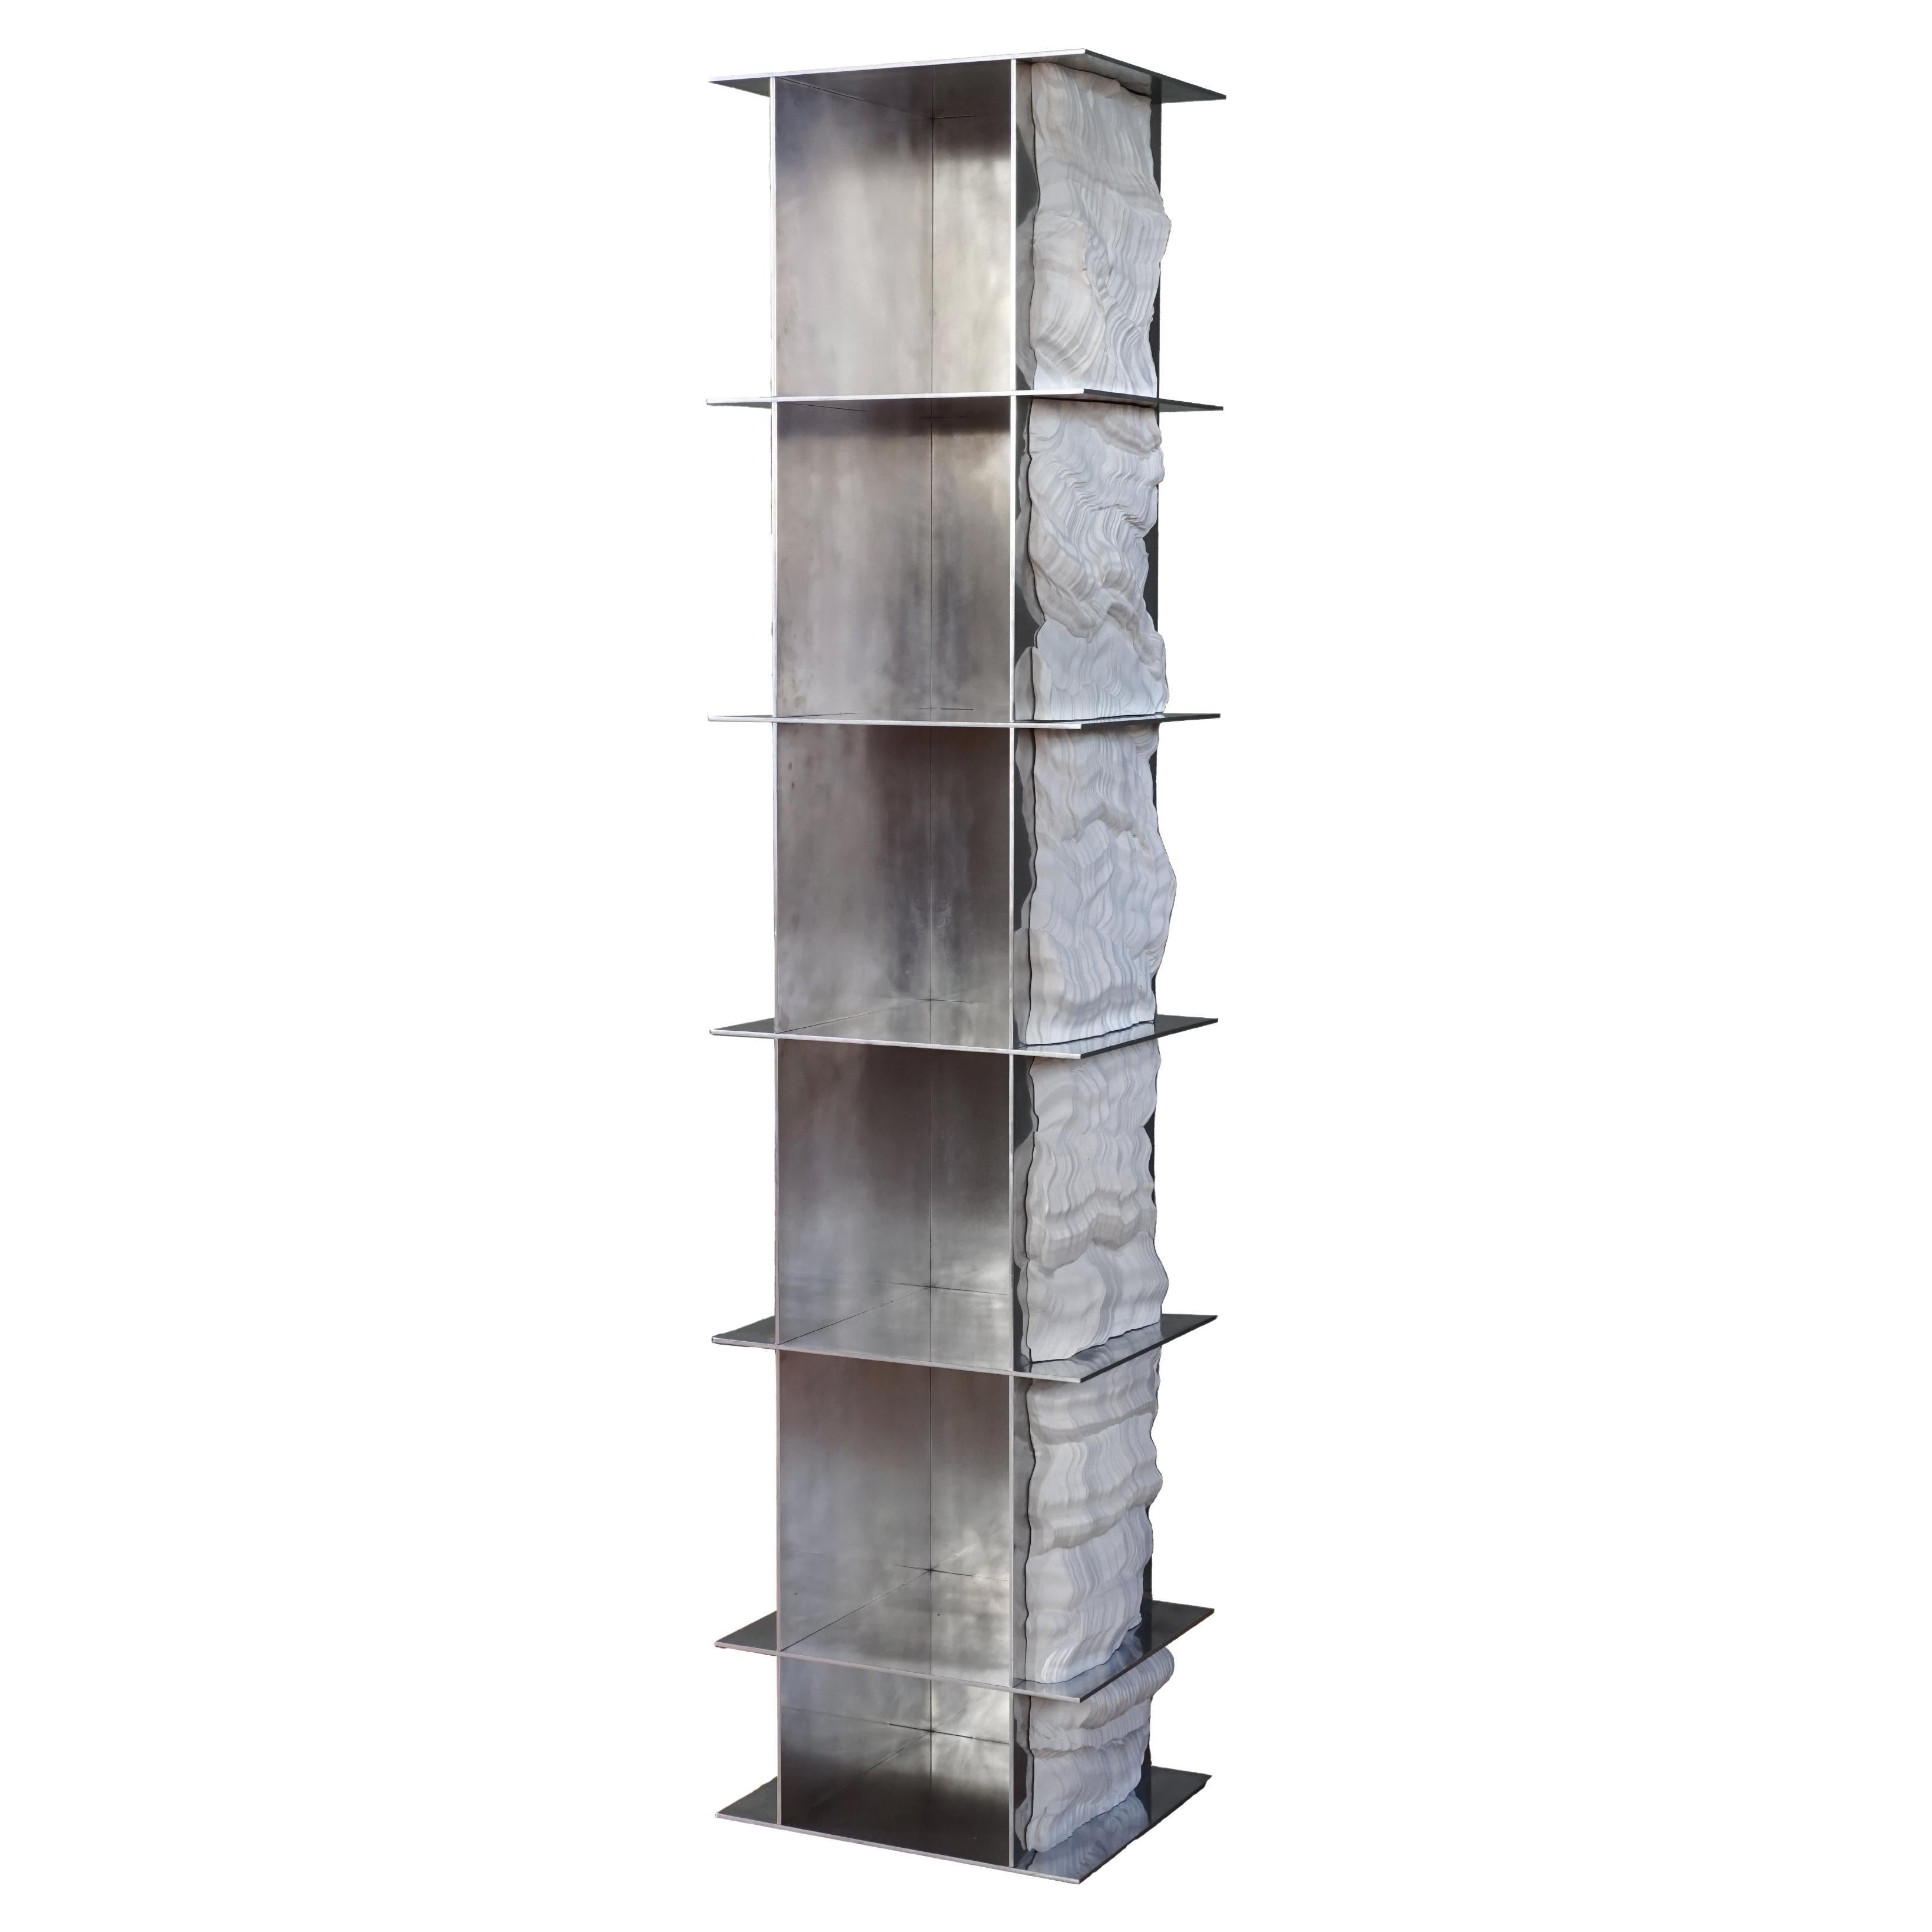 FF Grid Shelving 1 For Sale